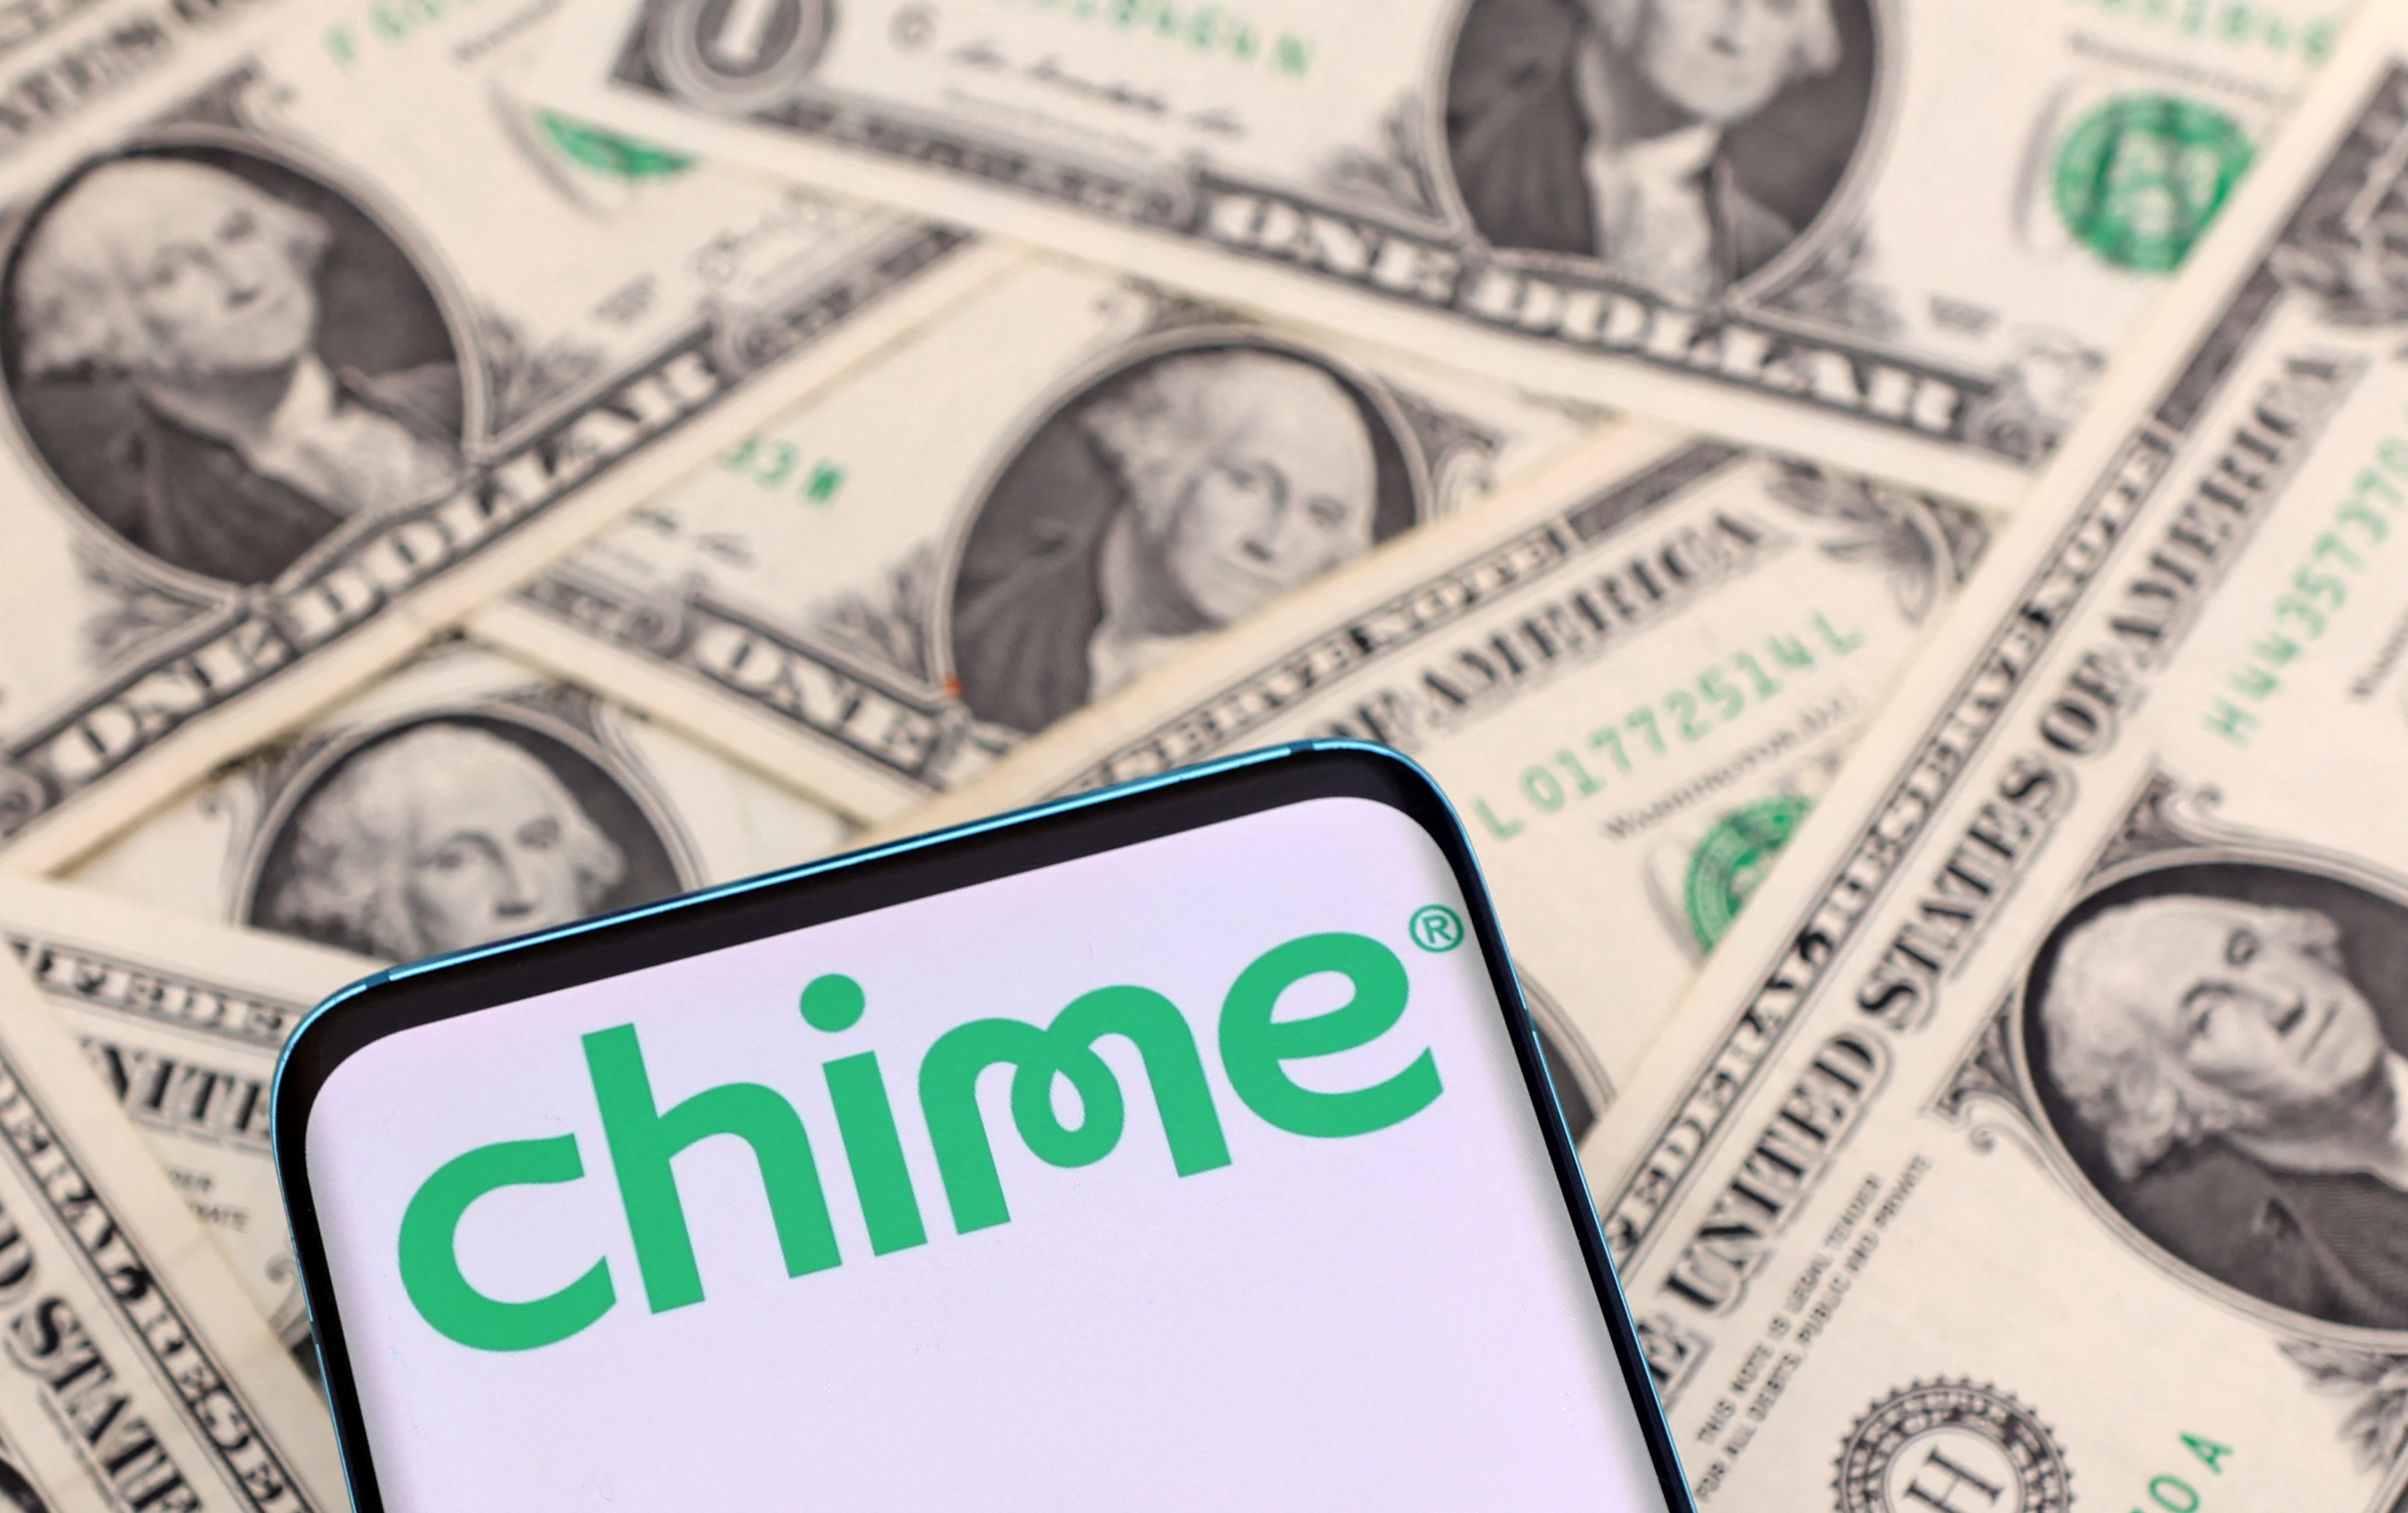 An illustration shows the Chime logo and U.S. dollar banknotes